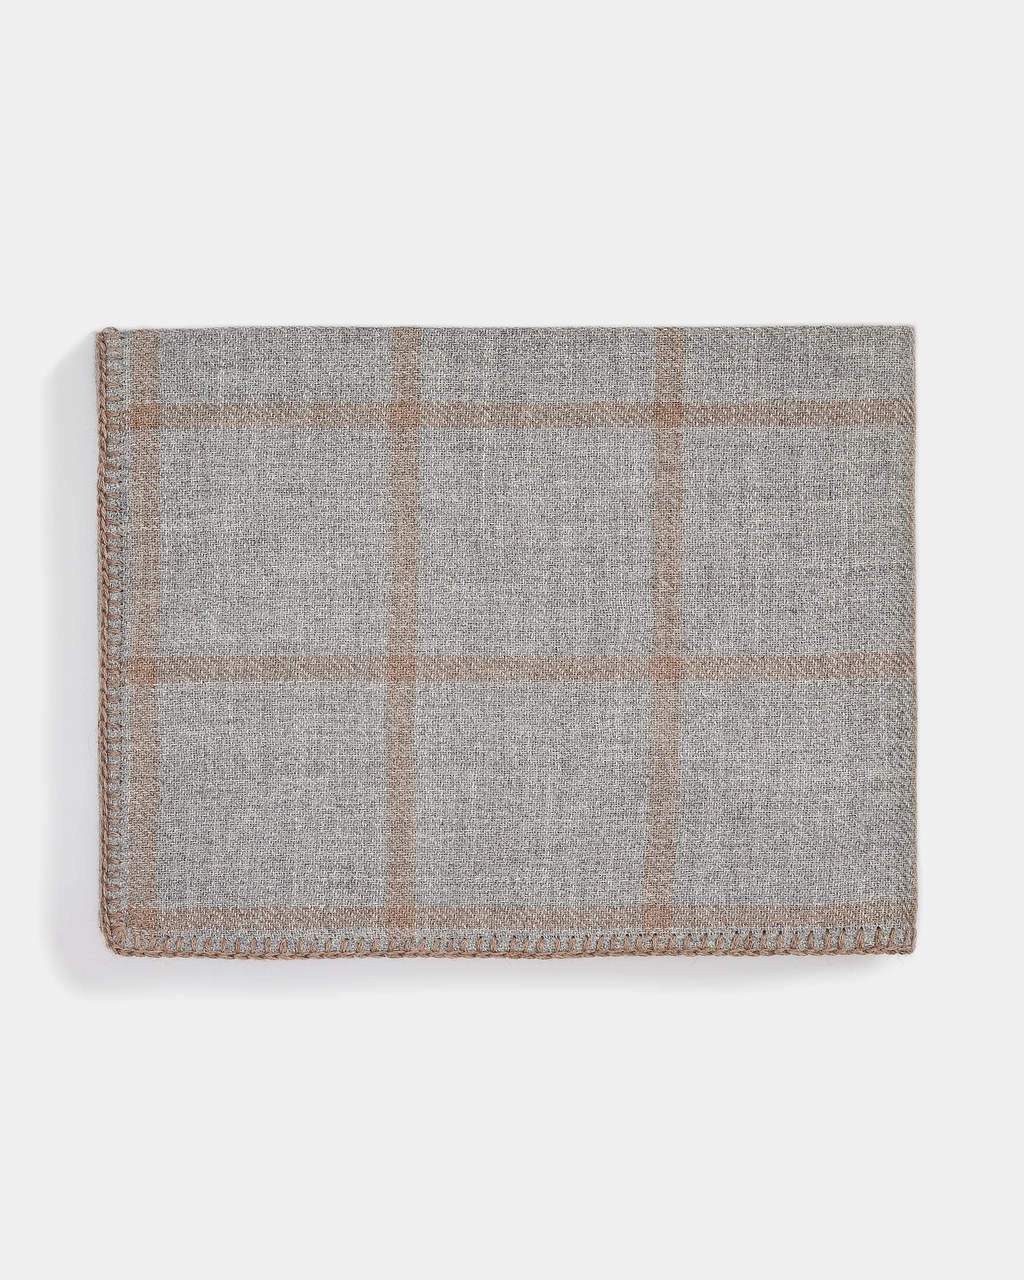 Graydon Alpaca Throw in Light Grey and Taupe by Alicia Adams